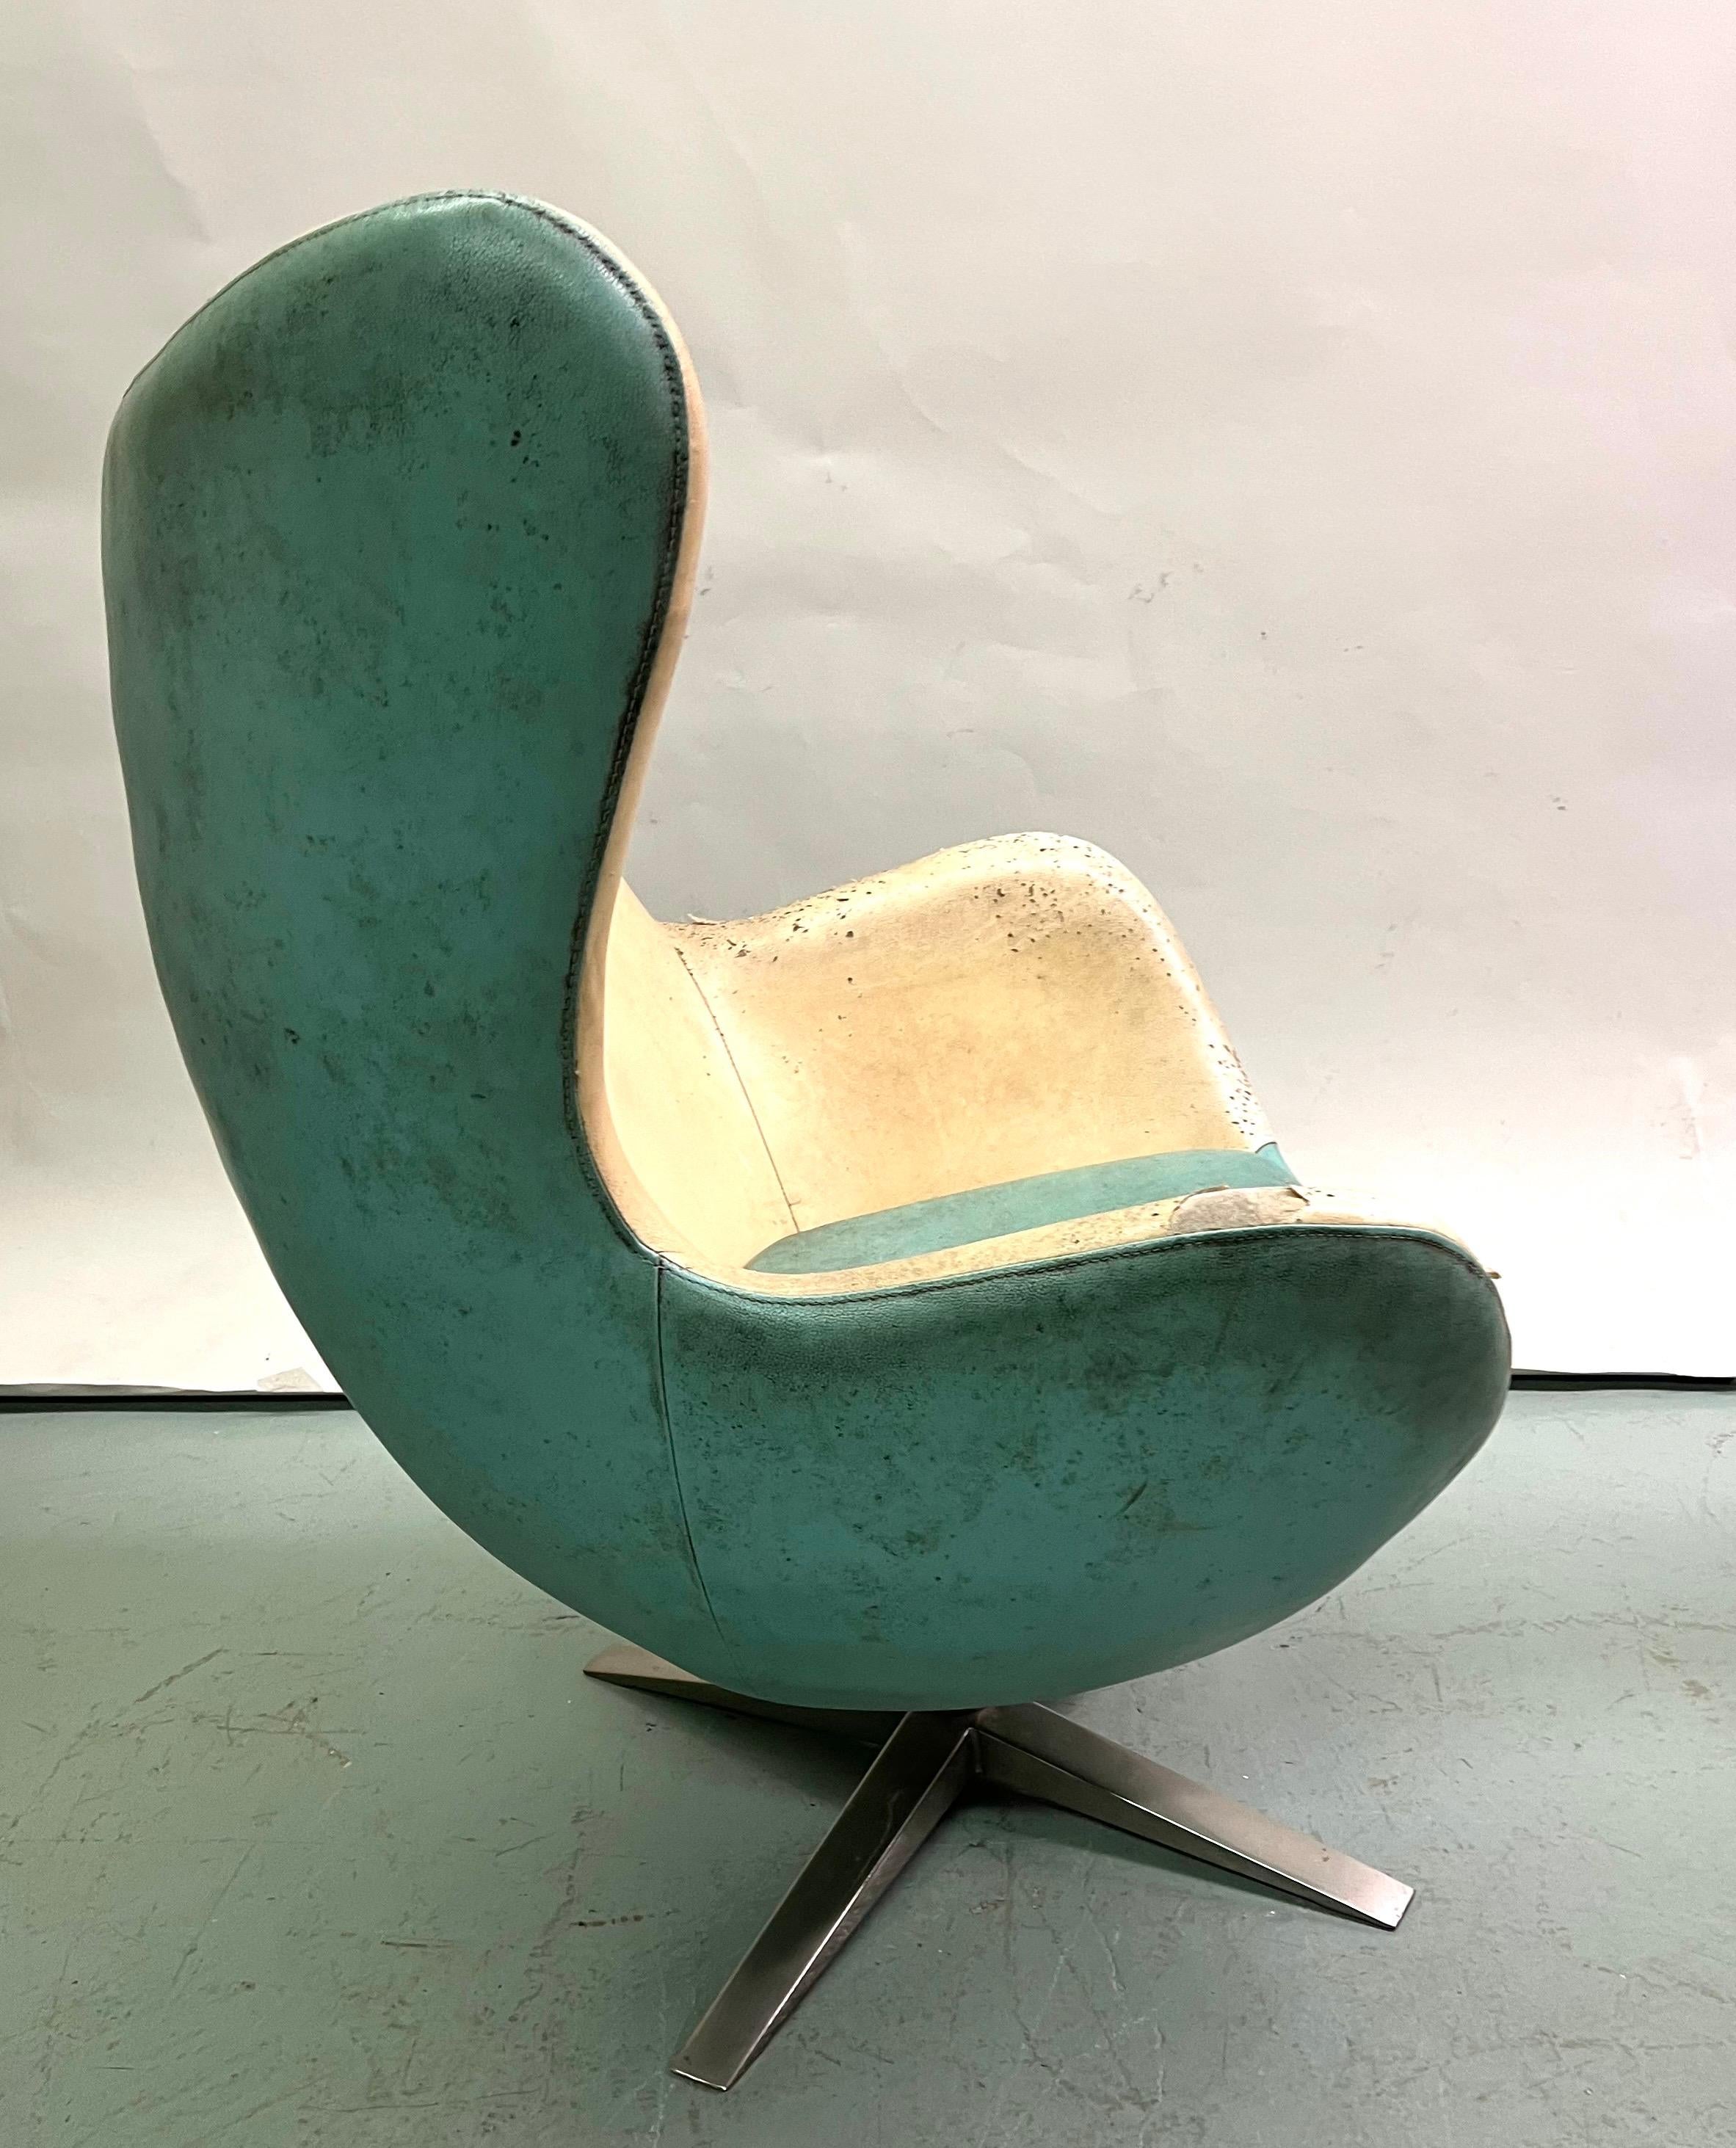 Set of 3 Danish Organic Modern Egg Lounge Chairs attr. Arne Jacobsen, 2 Leather  For Sale 3